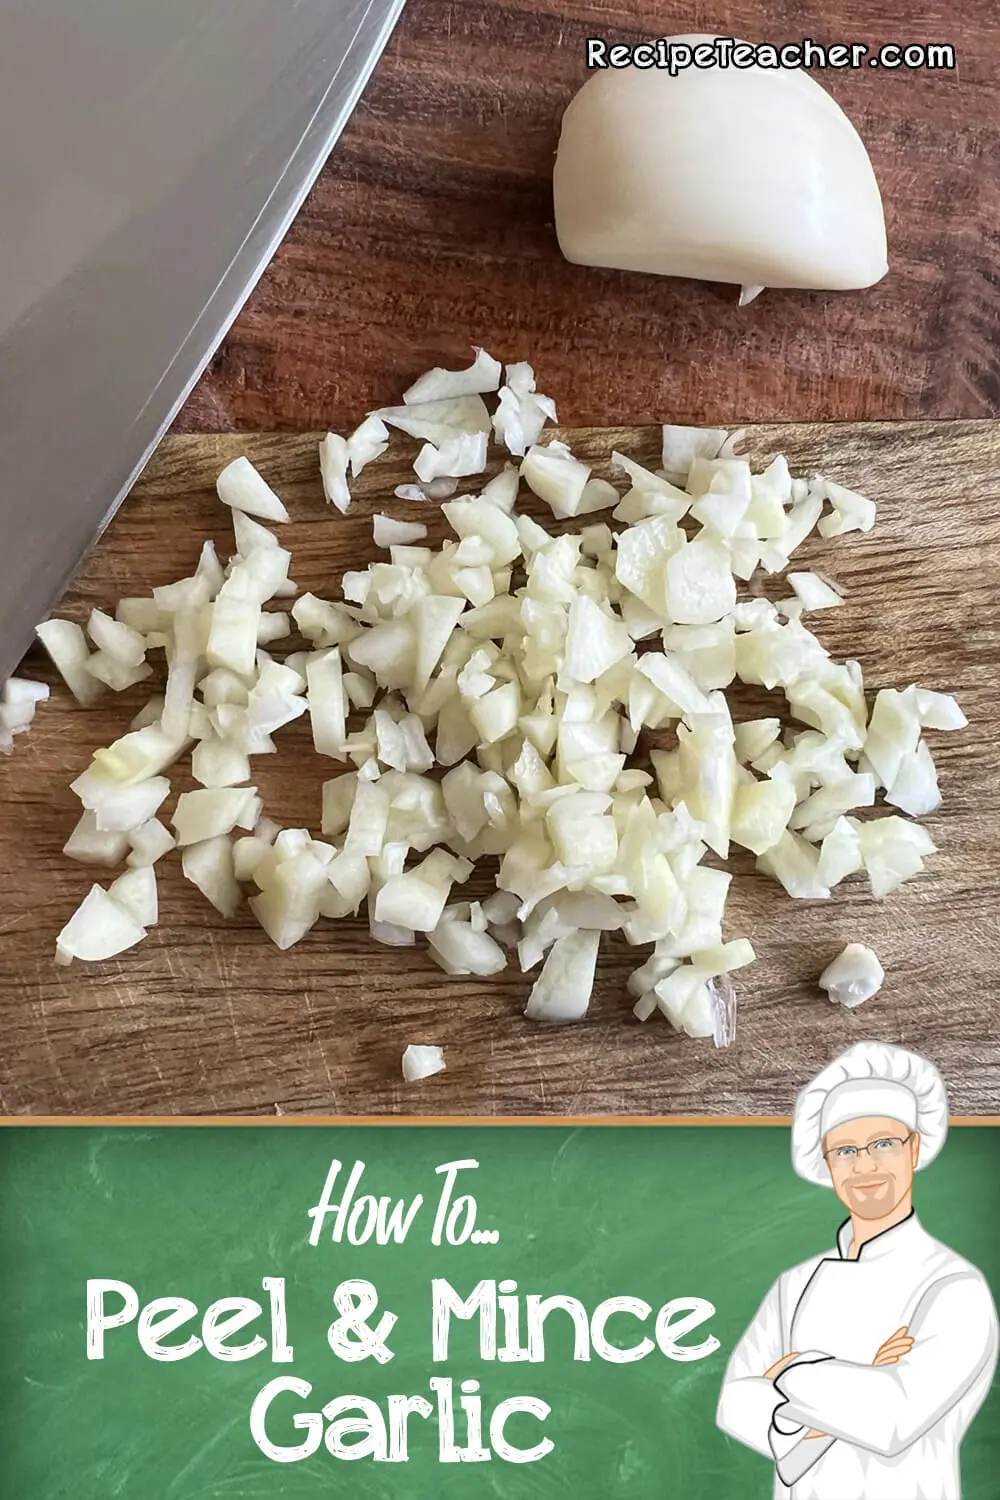 How to Peel and Mince Garlic